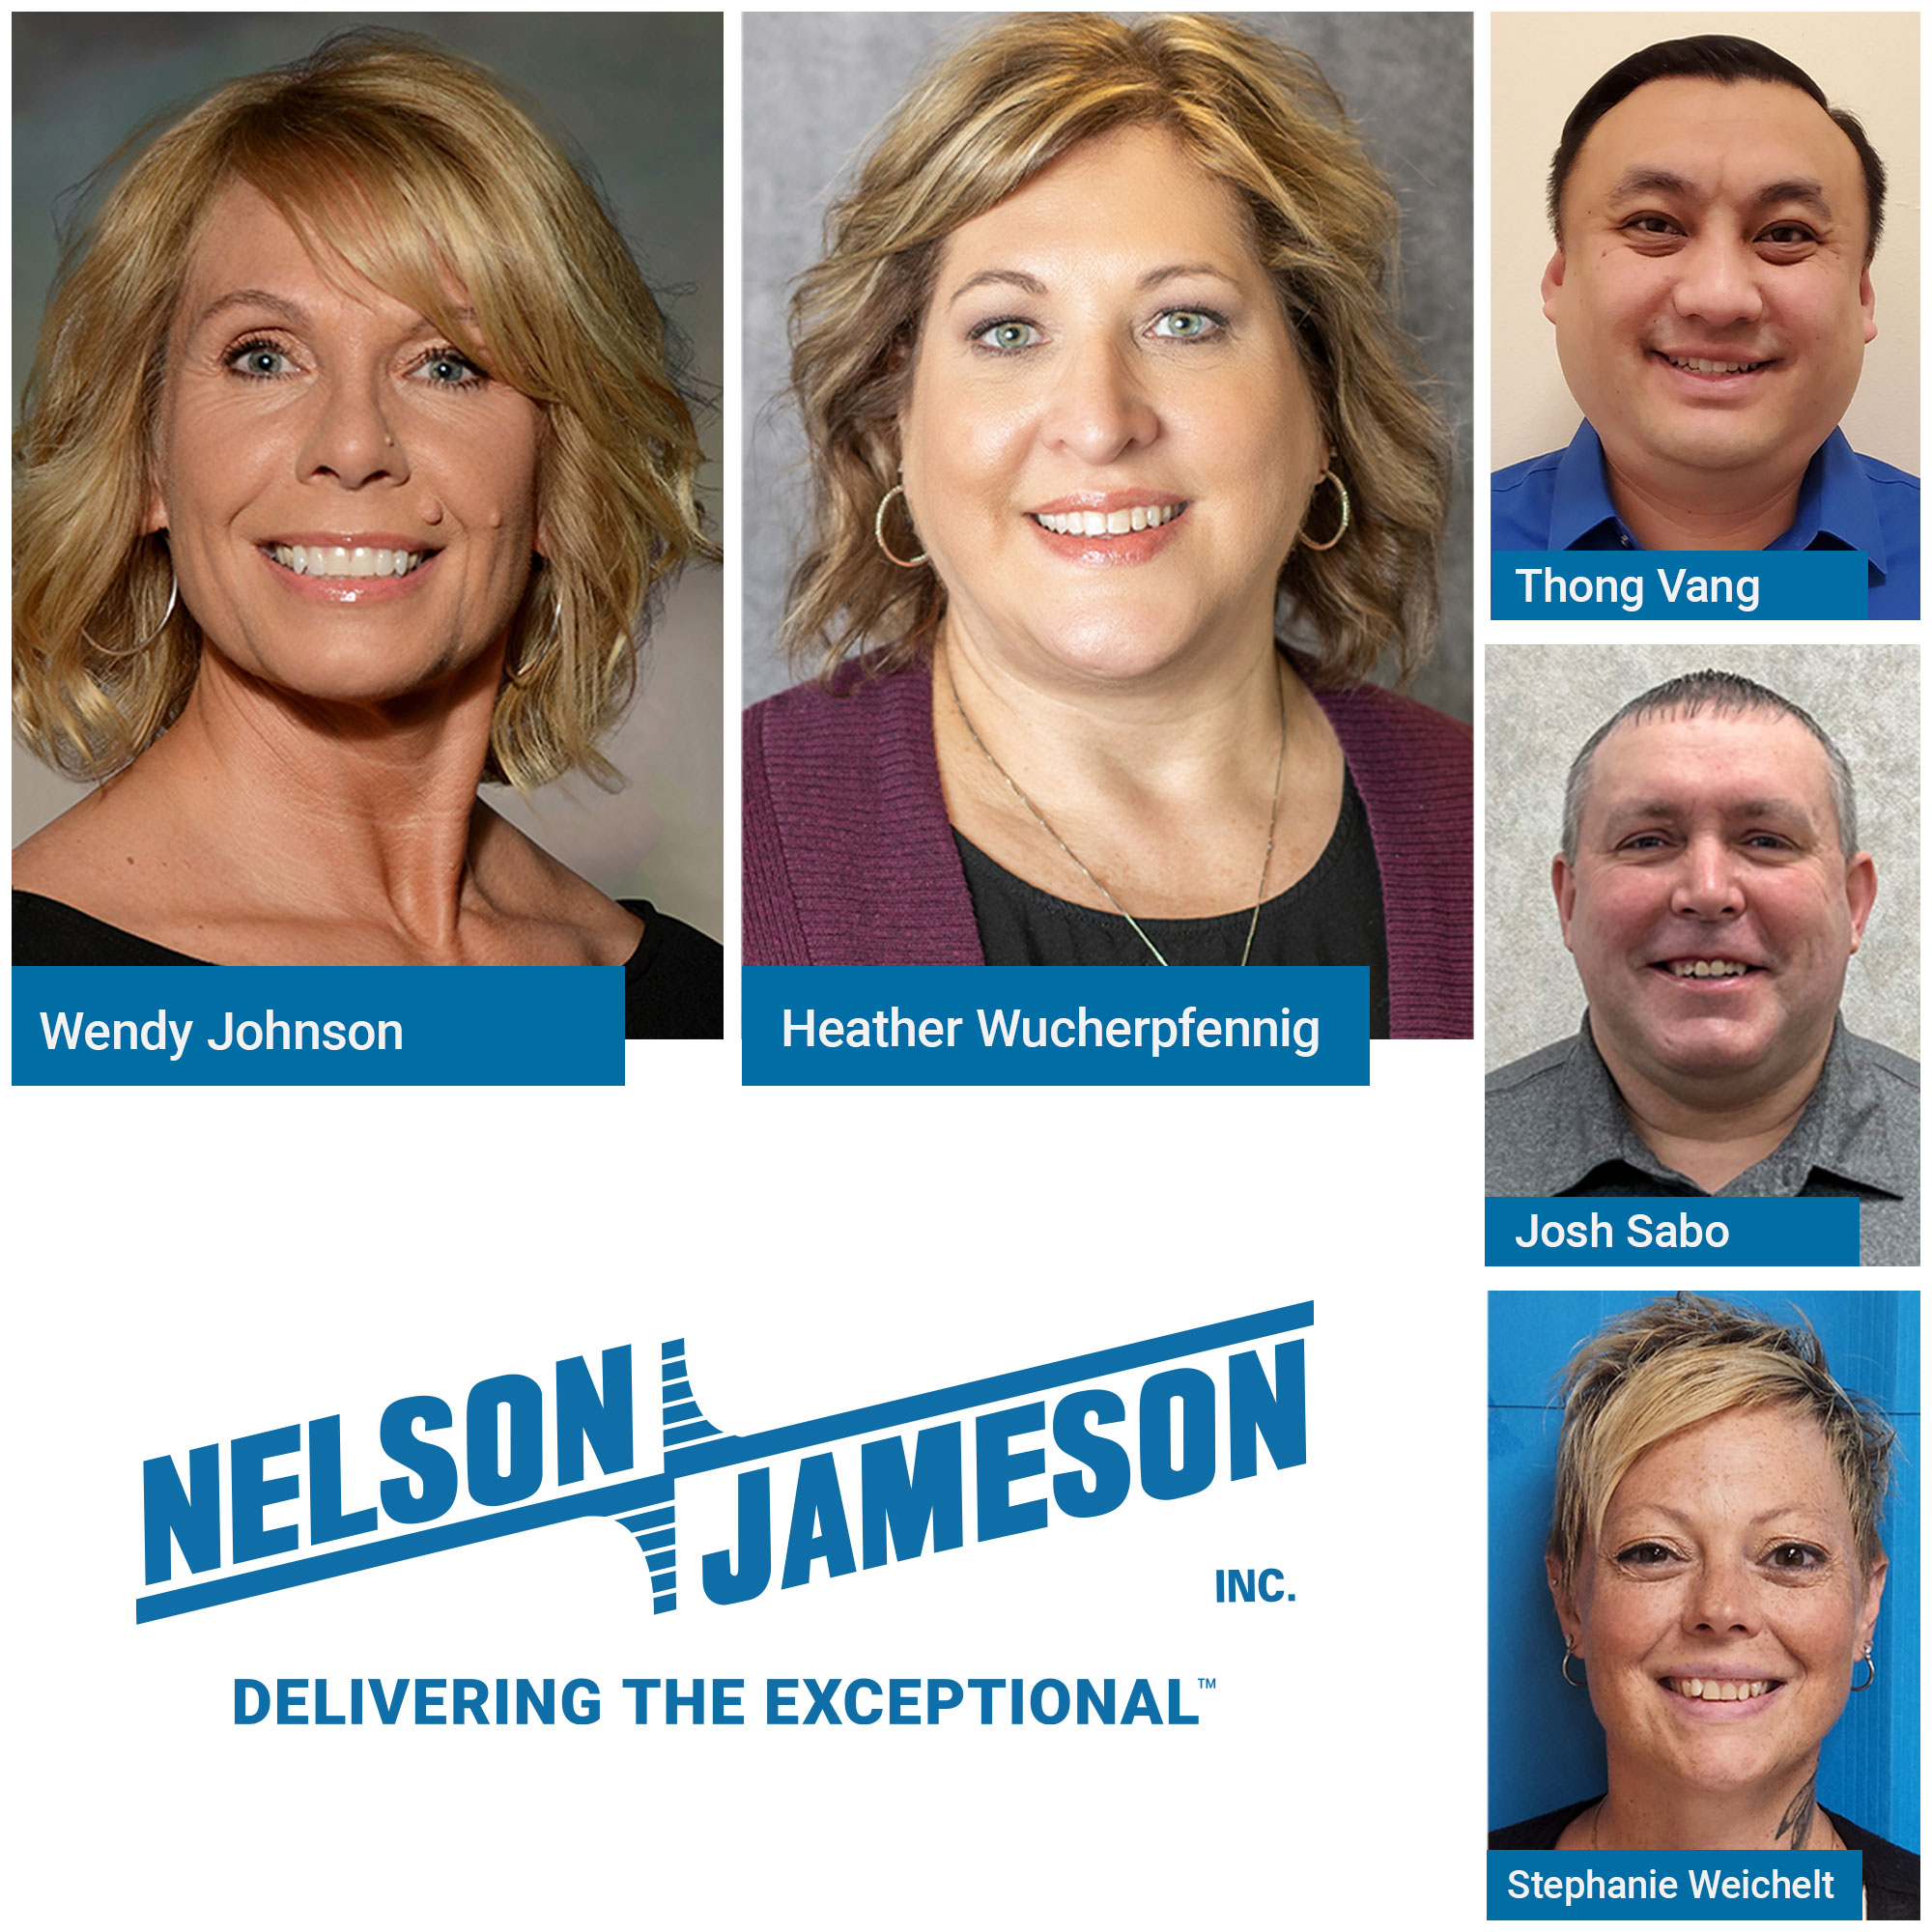 Food Processing Distributor Nelson-Jameson Expands Quality and Safety Compliance Department with Four New Roles 